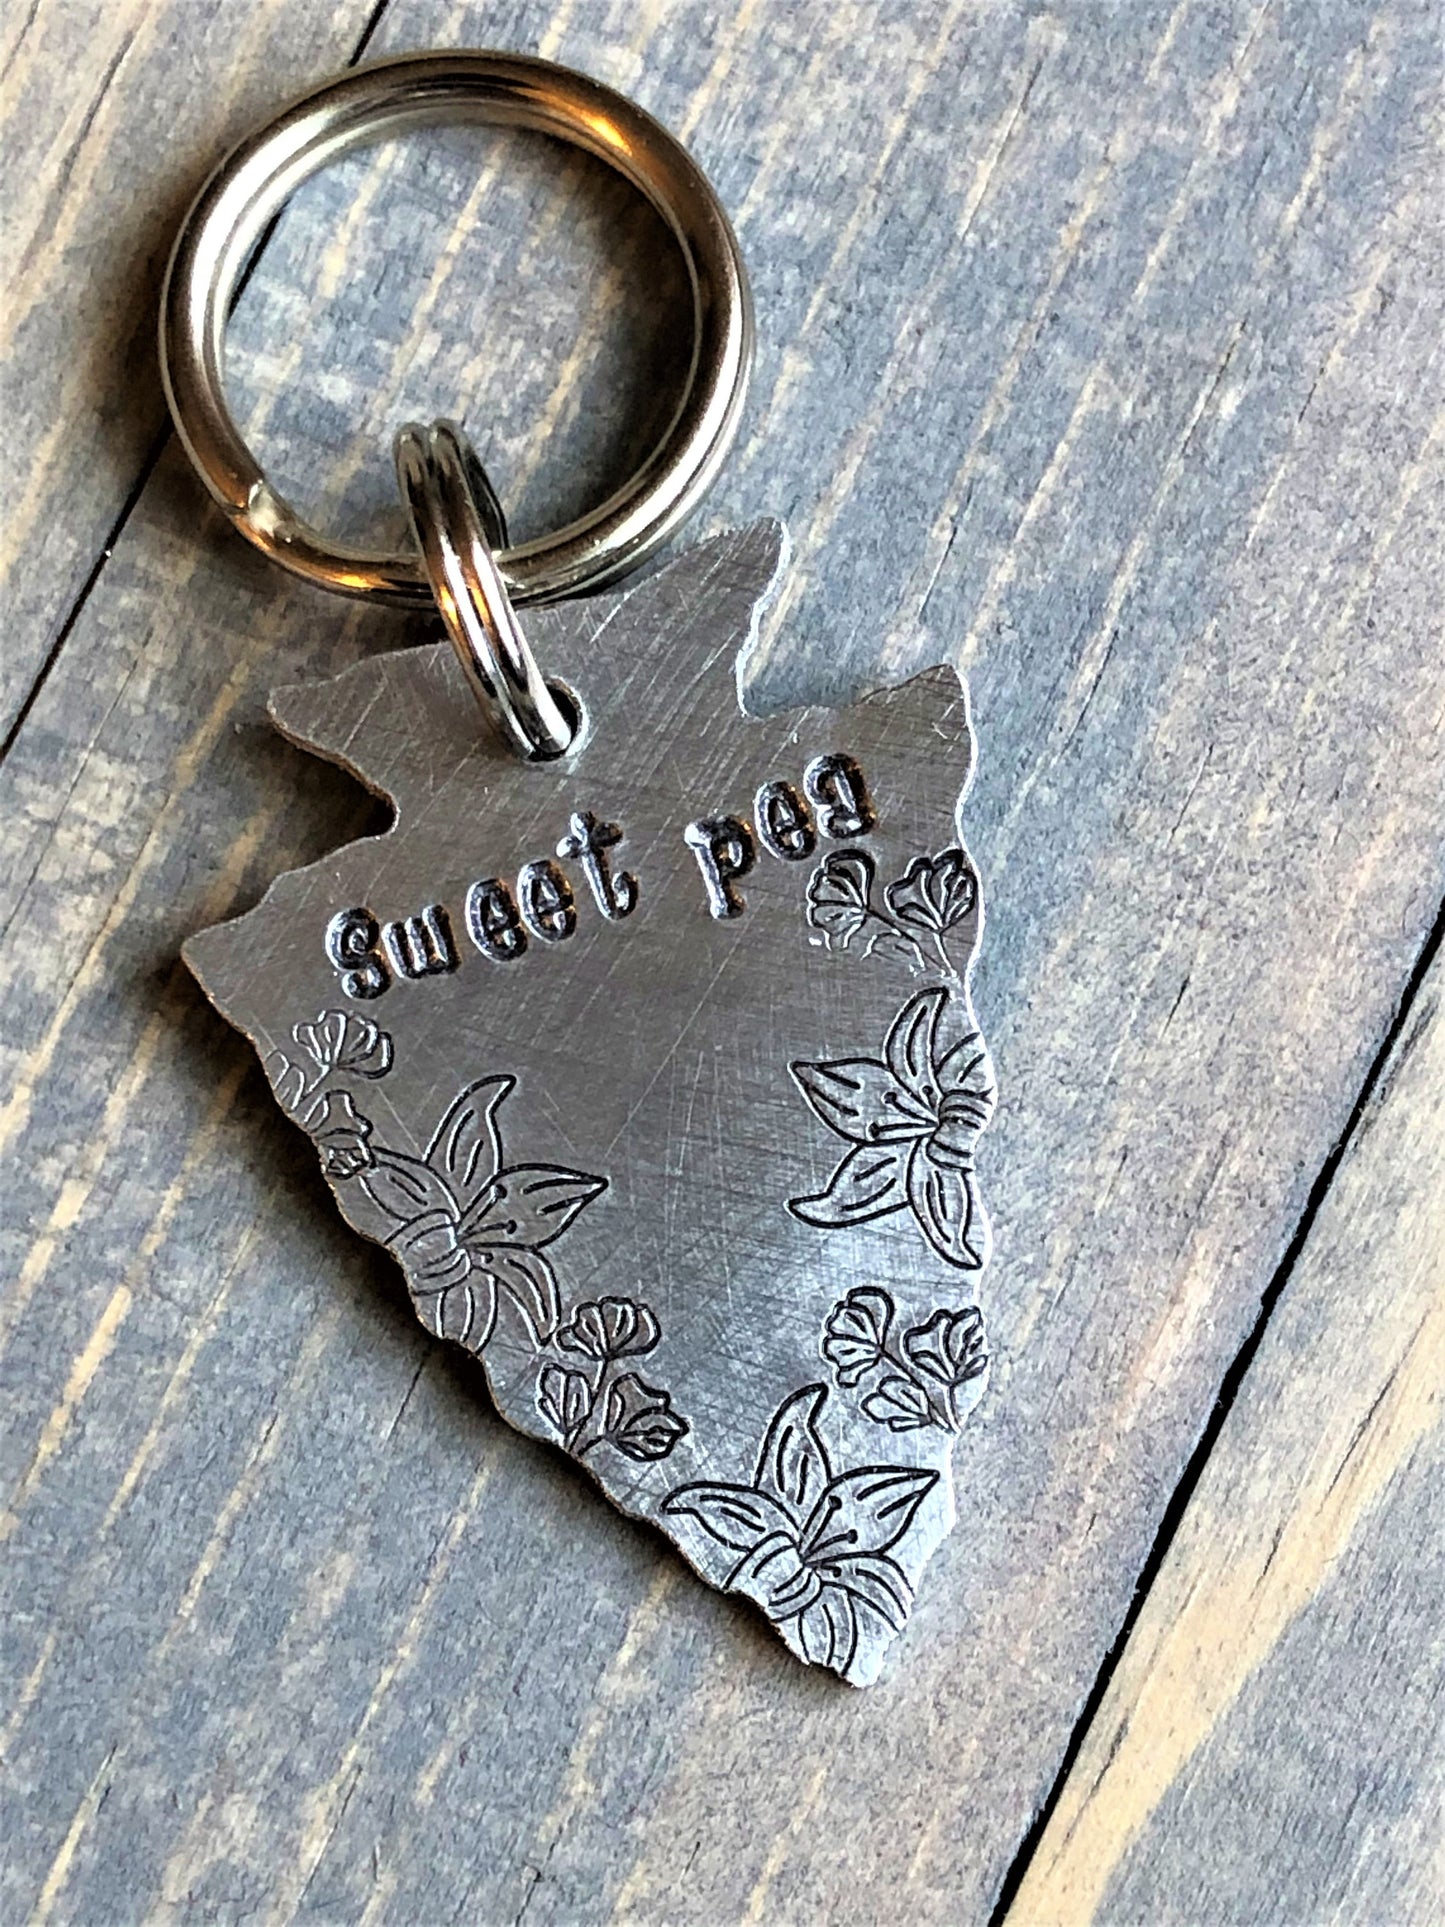 Custom Arrowhead Dog Tag, Hand Stamped Pet ID, Personalized Dog Tag for Dog, Arrowhead Dog Tag with Lily and sweet peas, Dog ID with Lily